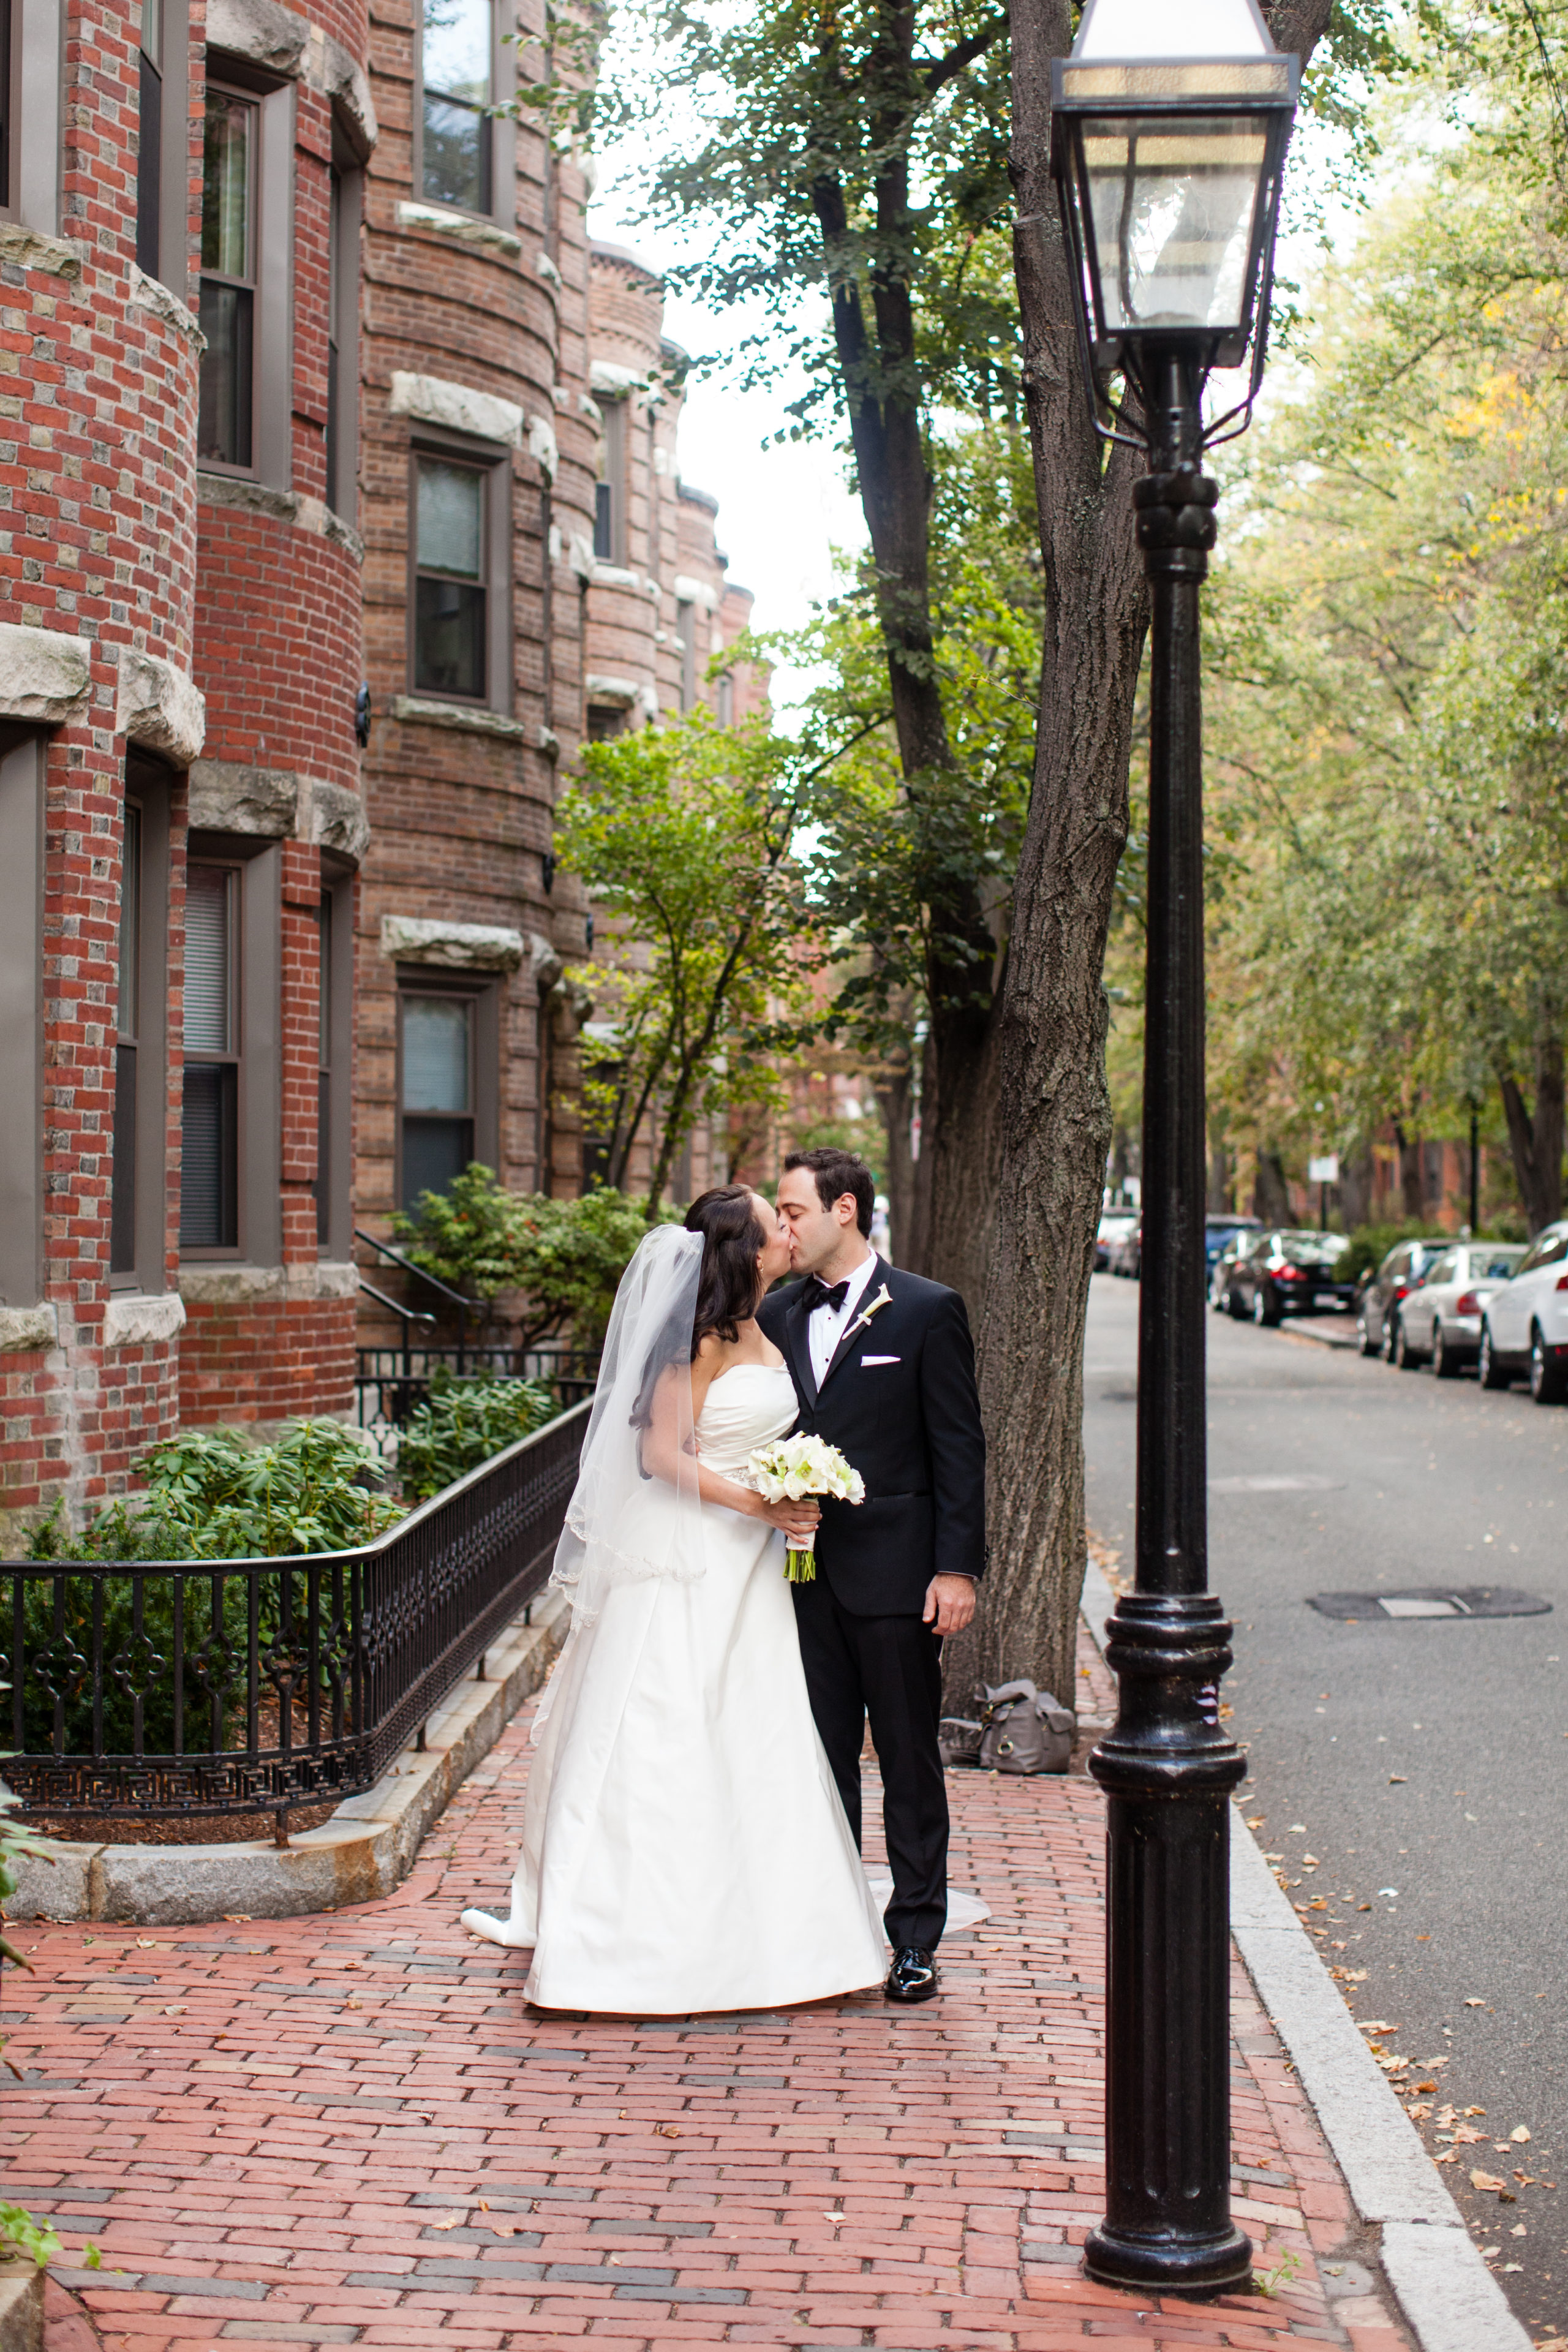 Just Married, this happy couple shares an intimate kiss on the sidewalk under a lamppost